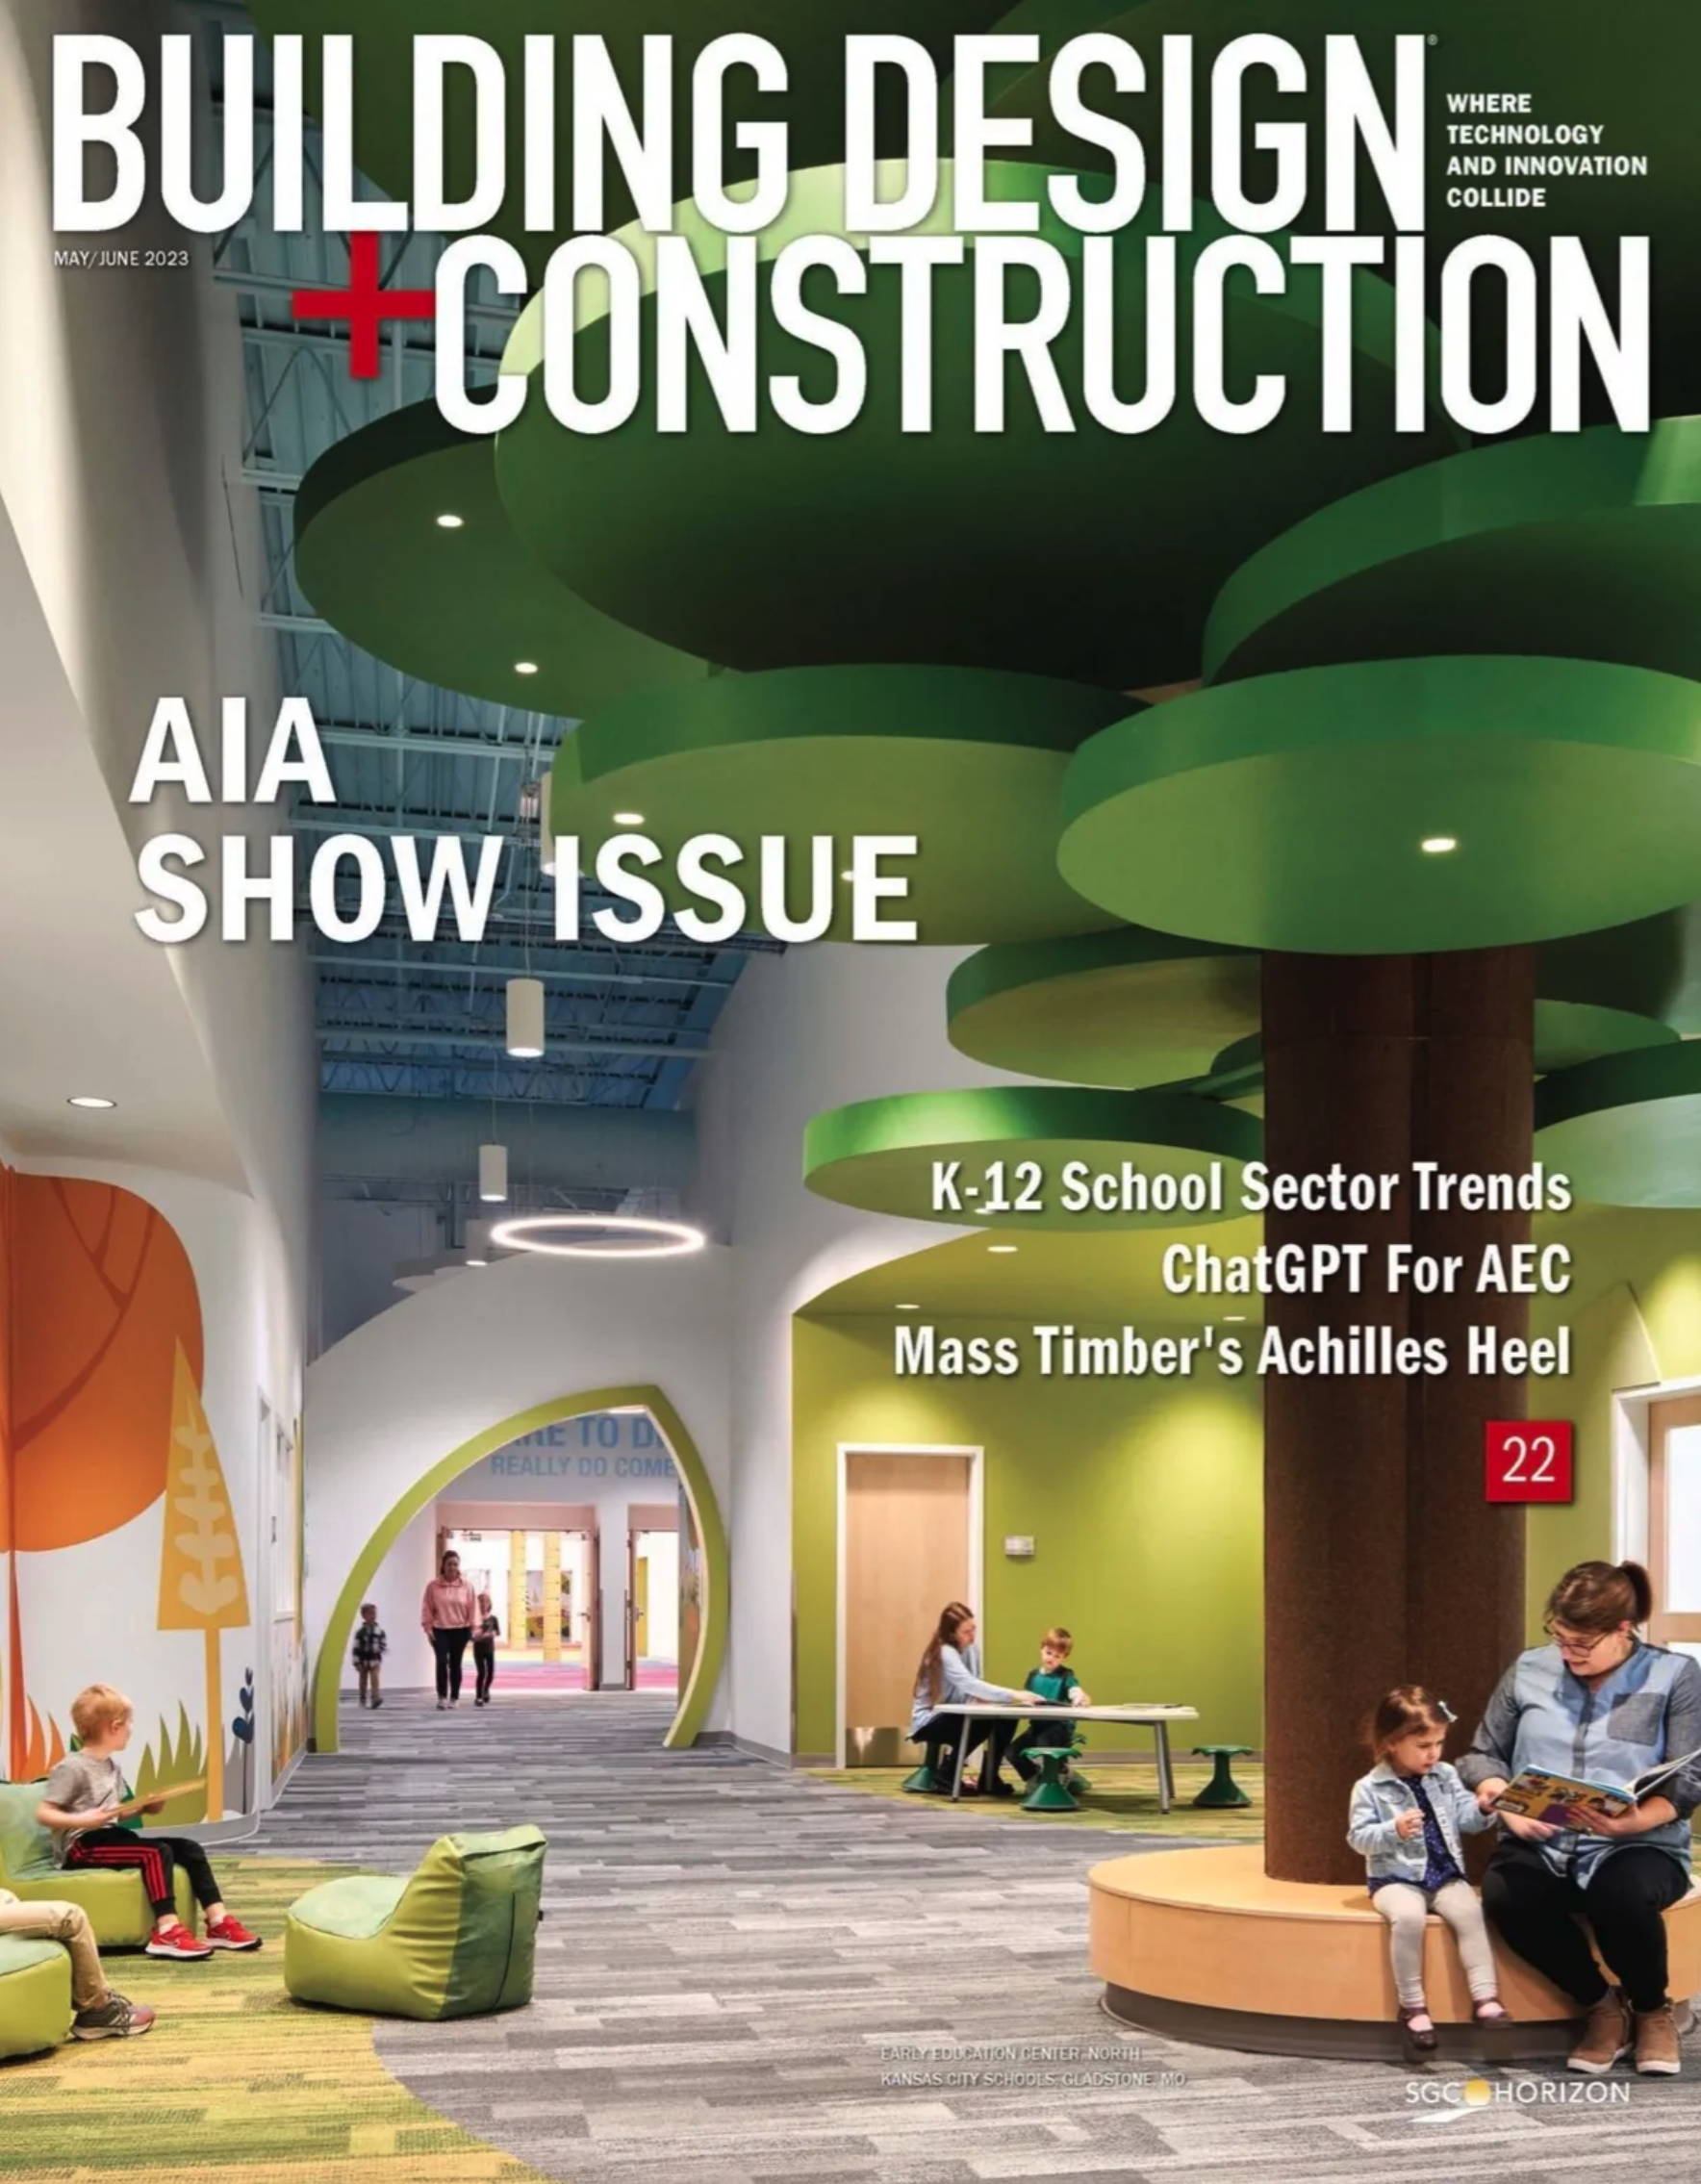 May/June 2023 issue of Building Design+Construction